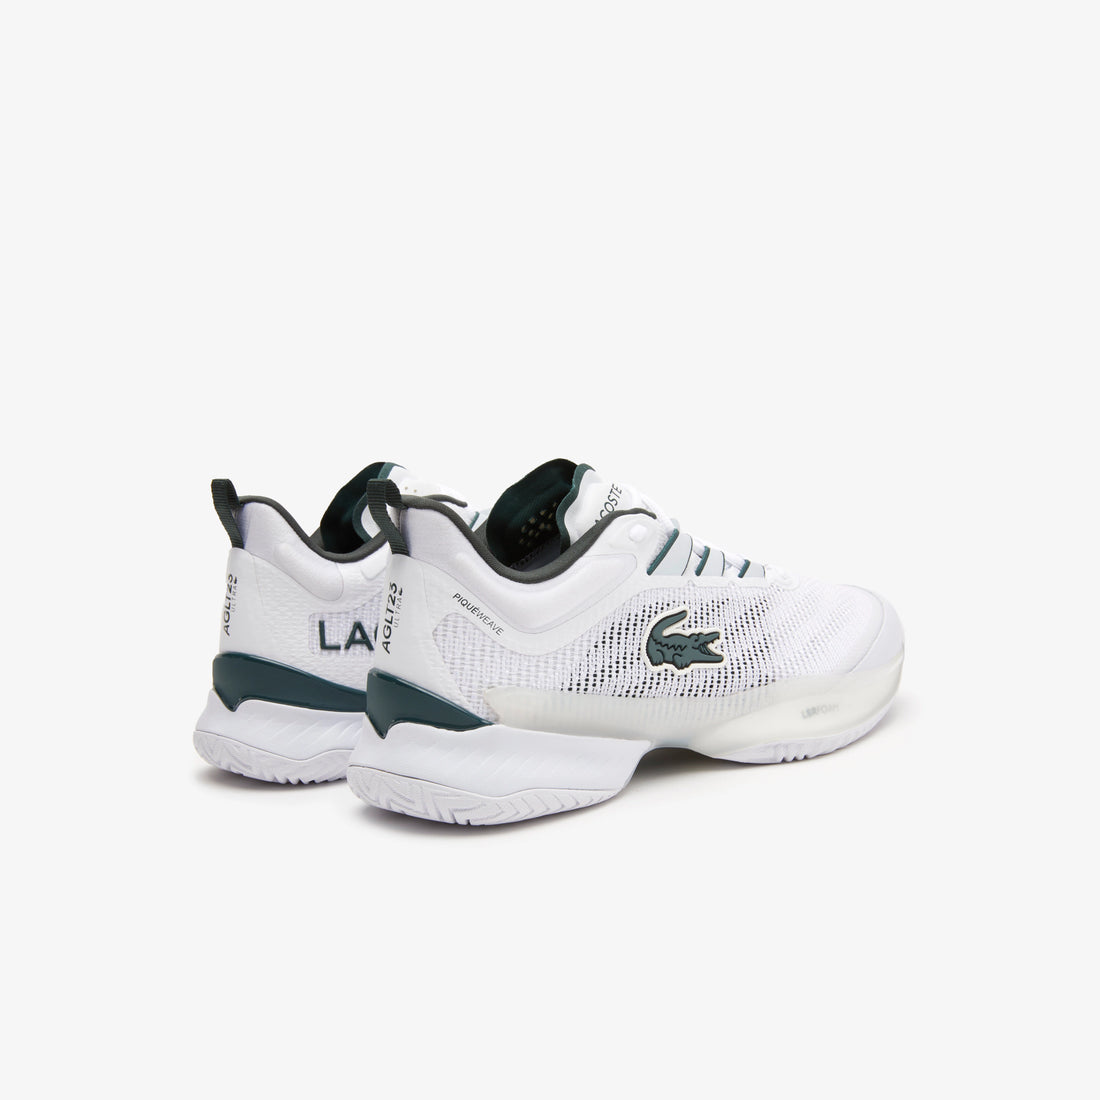 Lacoste AG-LT23 Ultra Women's Tennis Shoes [White/Green], 45% OFF